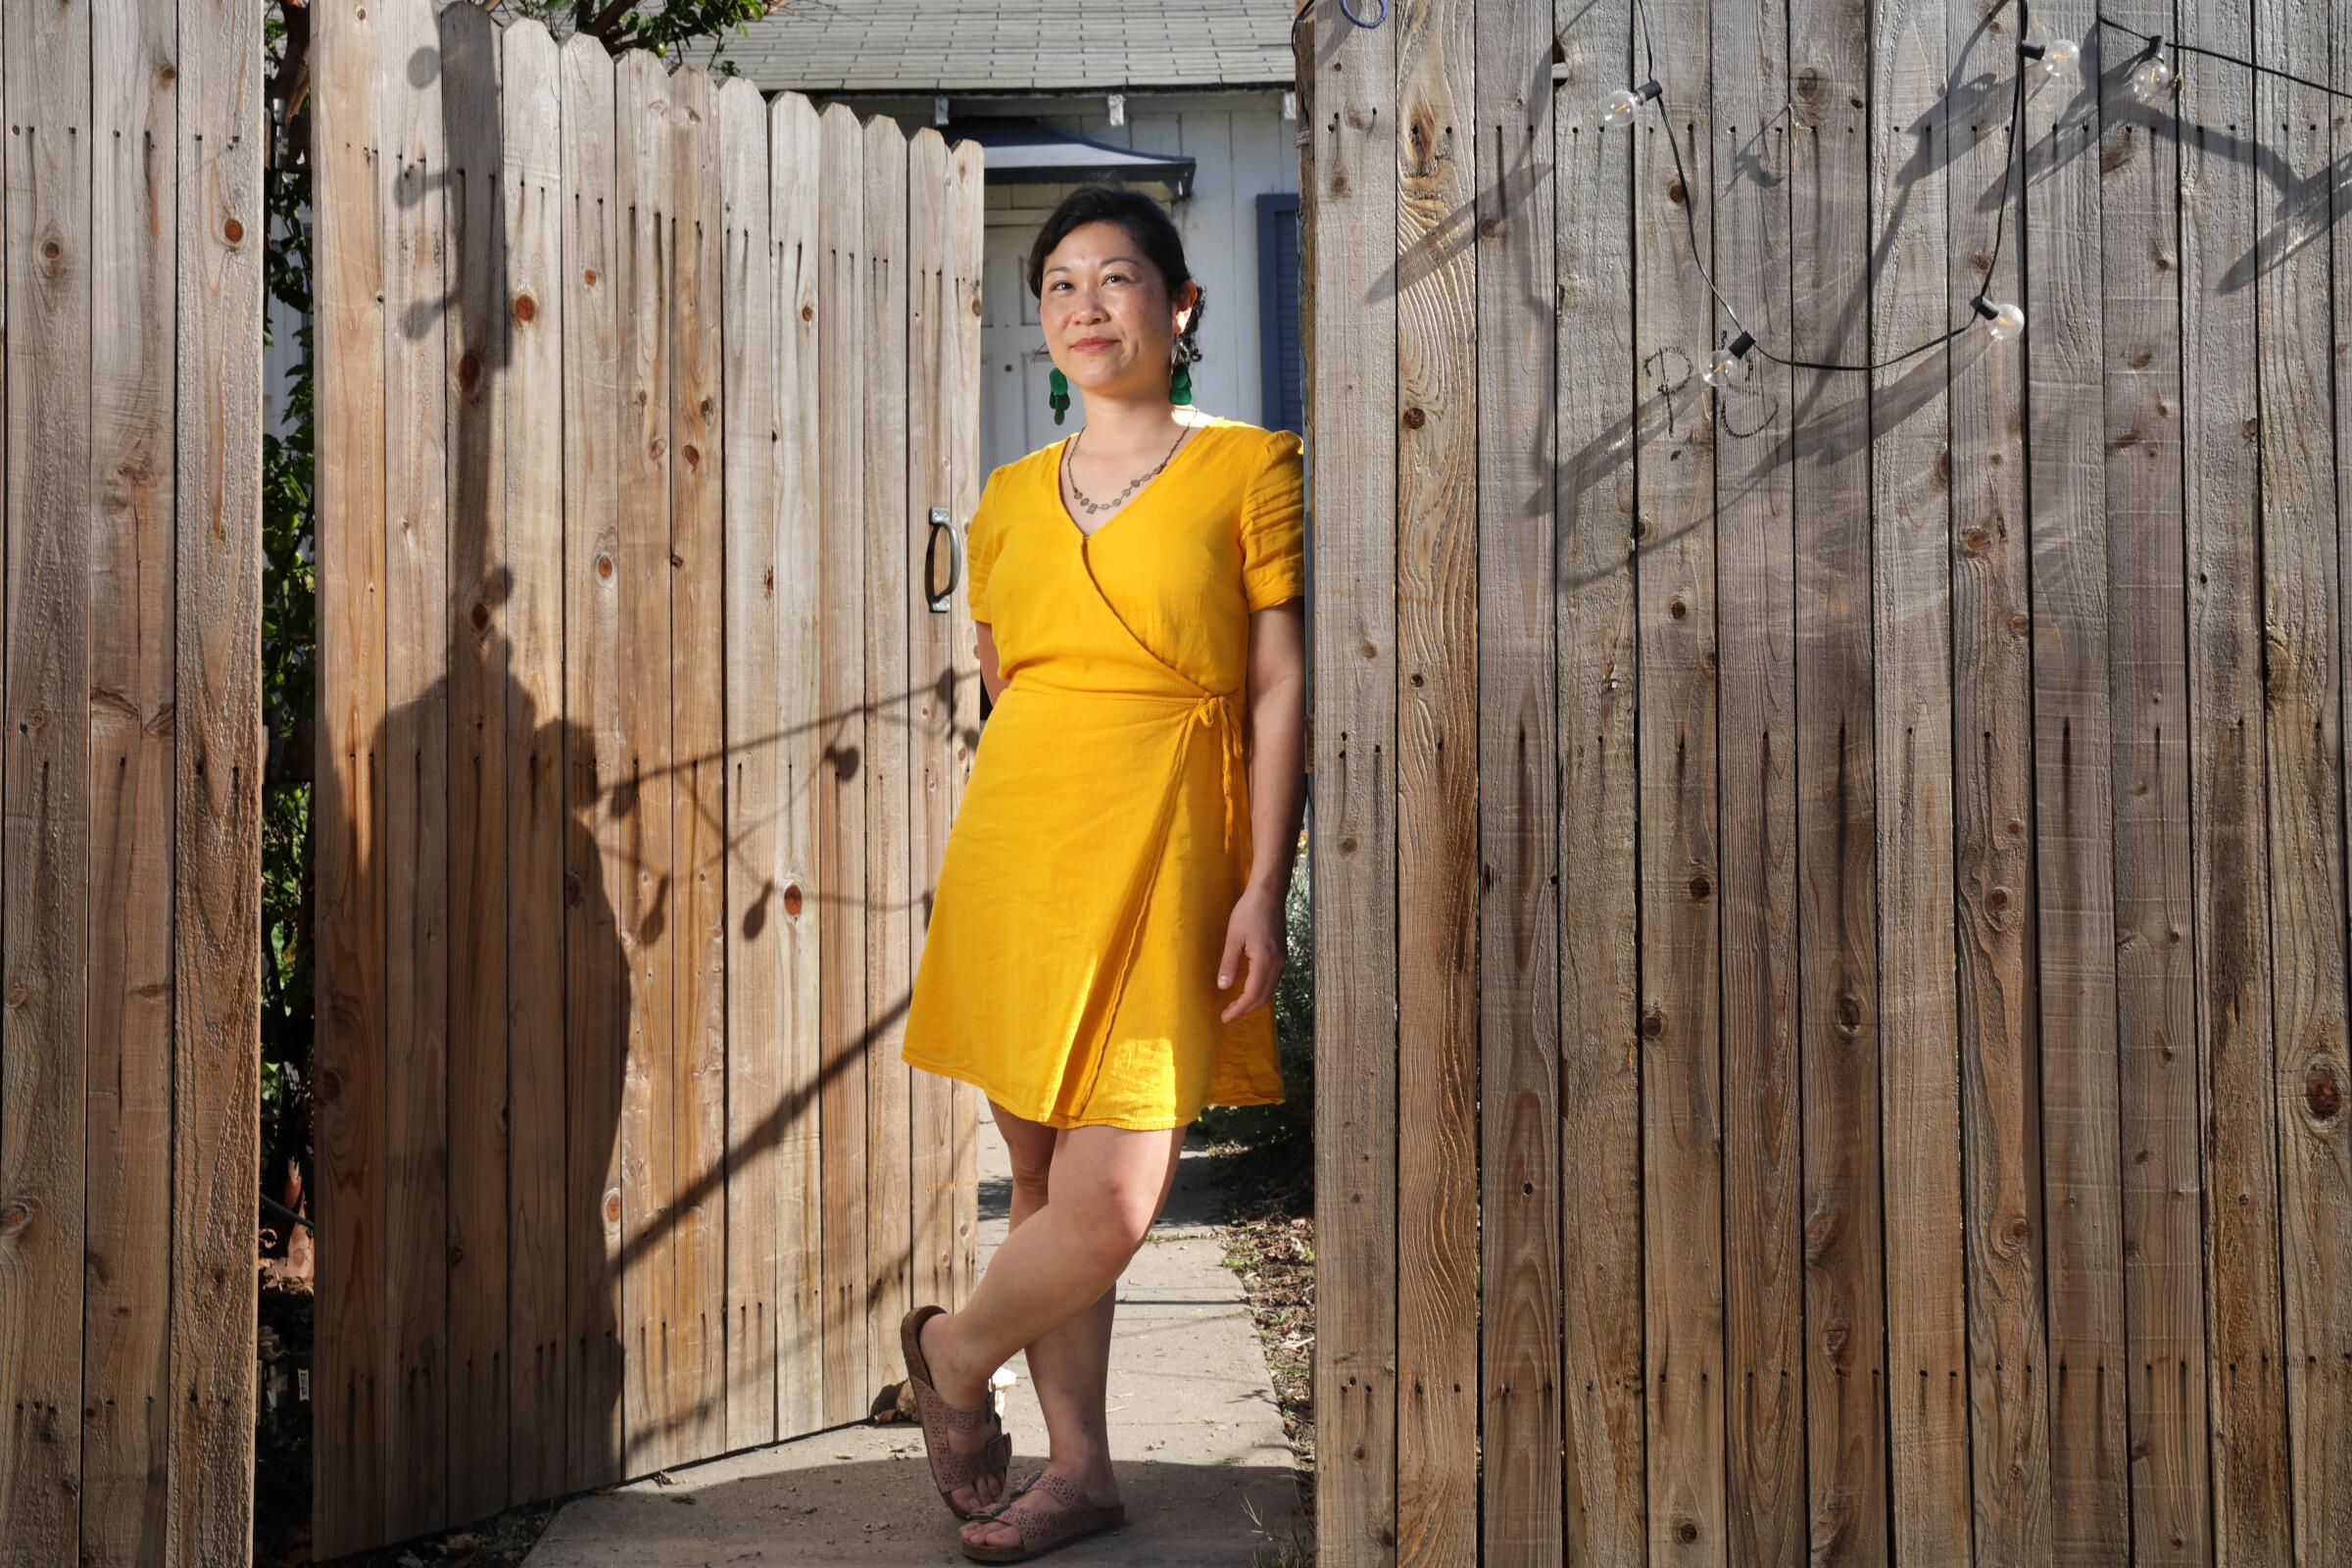 A woman leans against a wooden fence